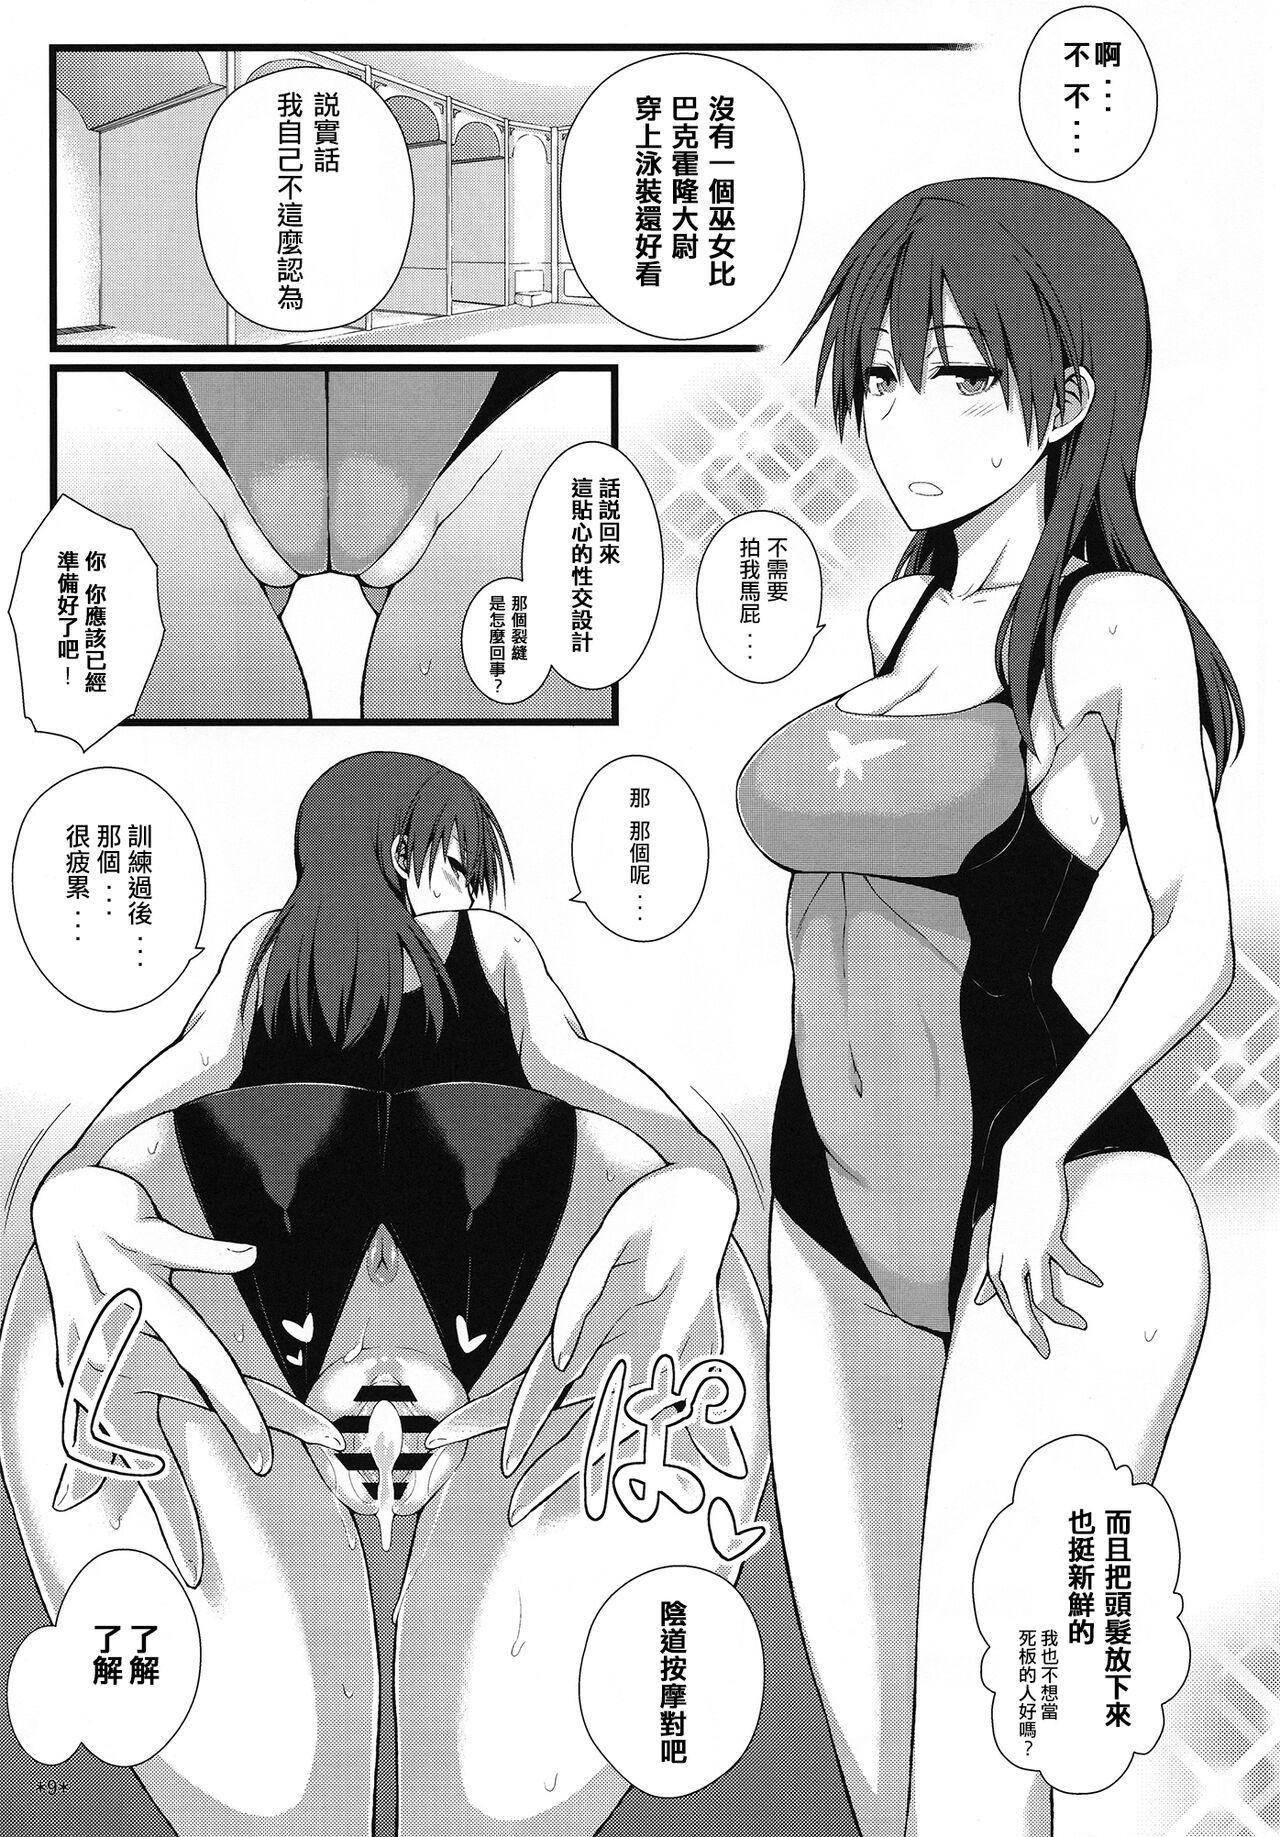 Bigtits KARLSLAND ABSORB - Strike witches Twink - Page 10